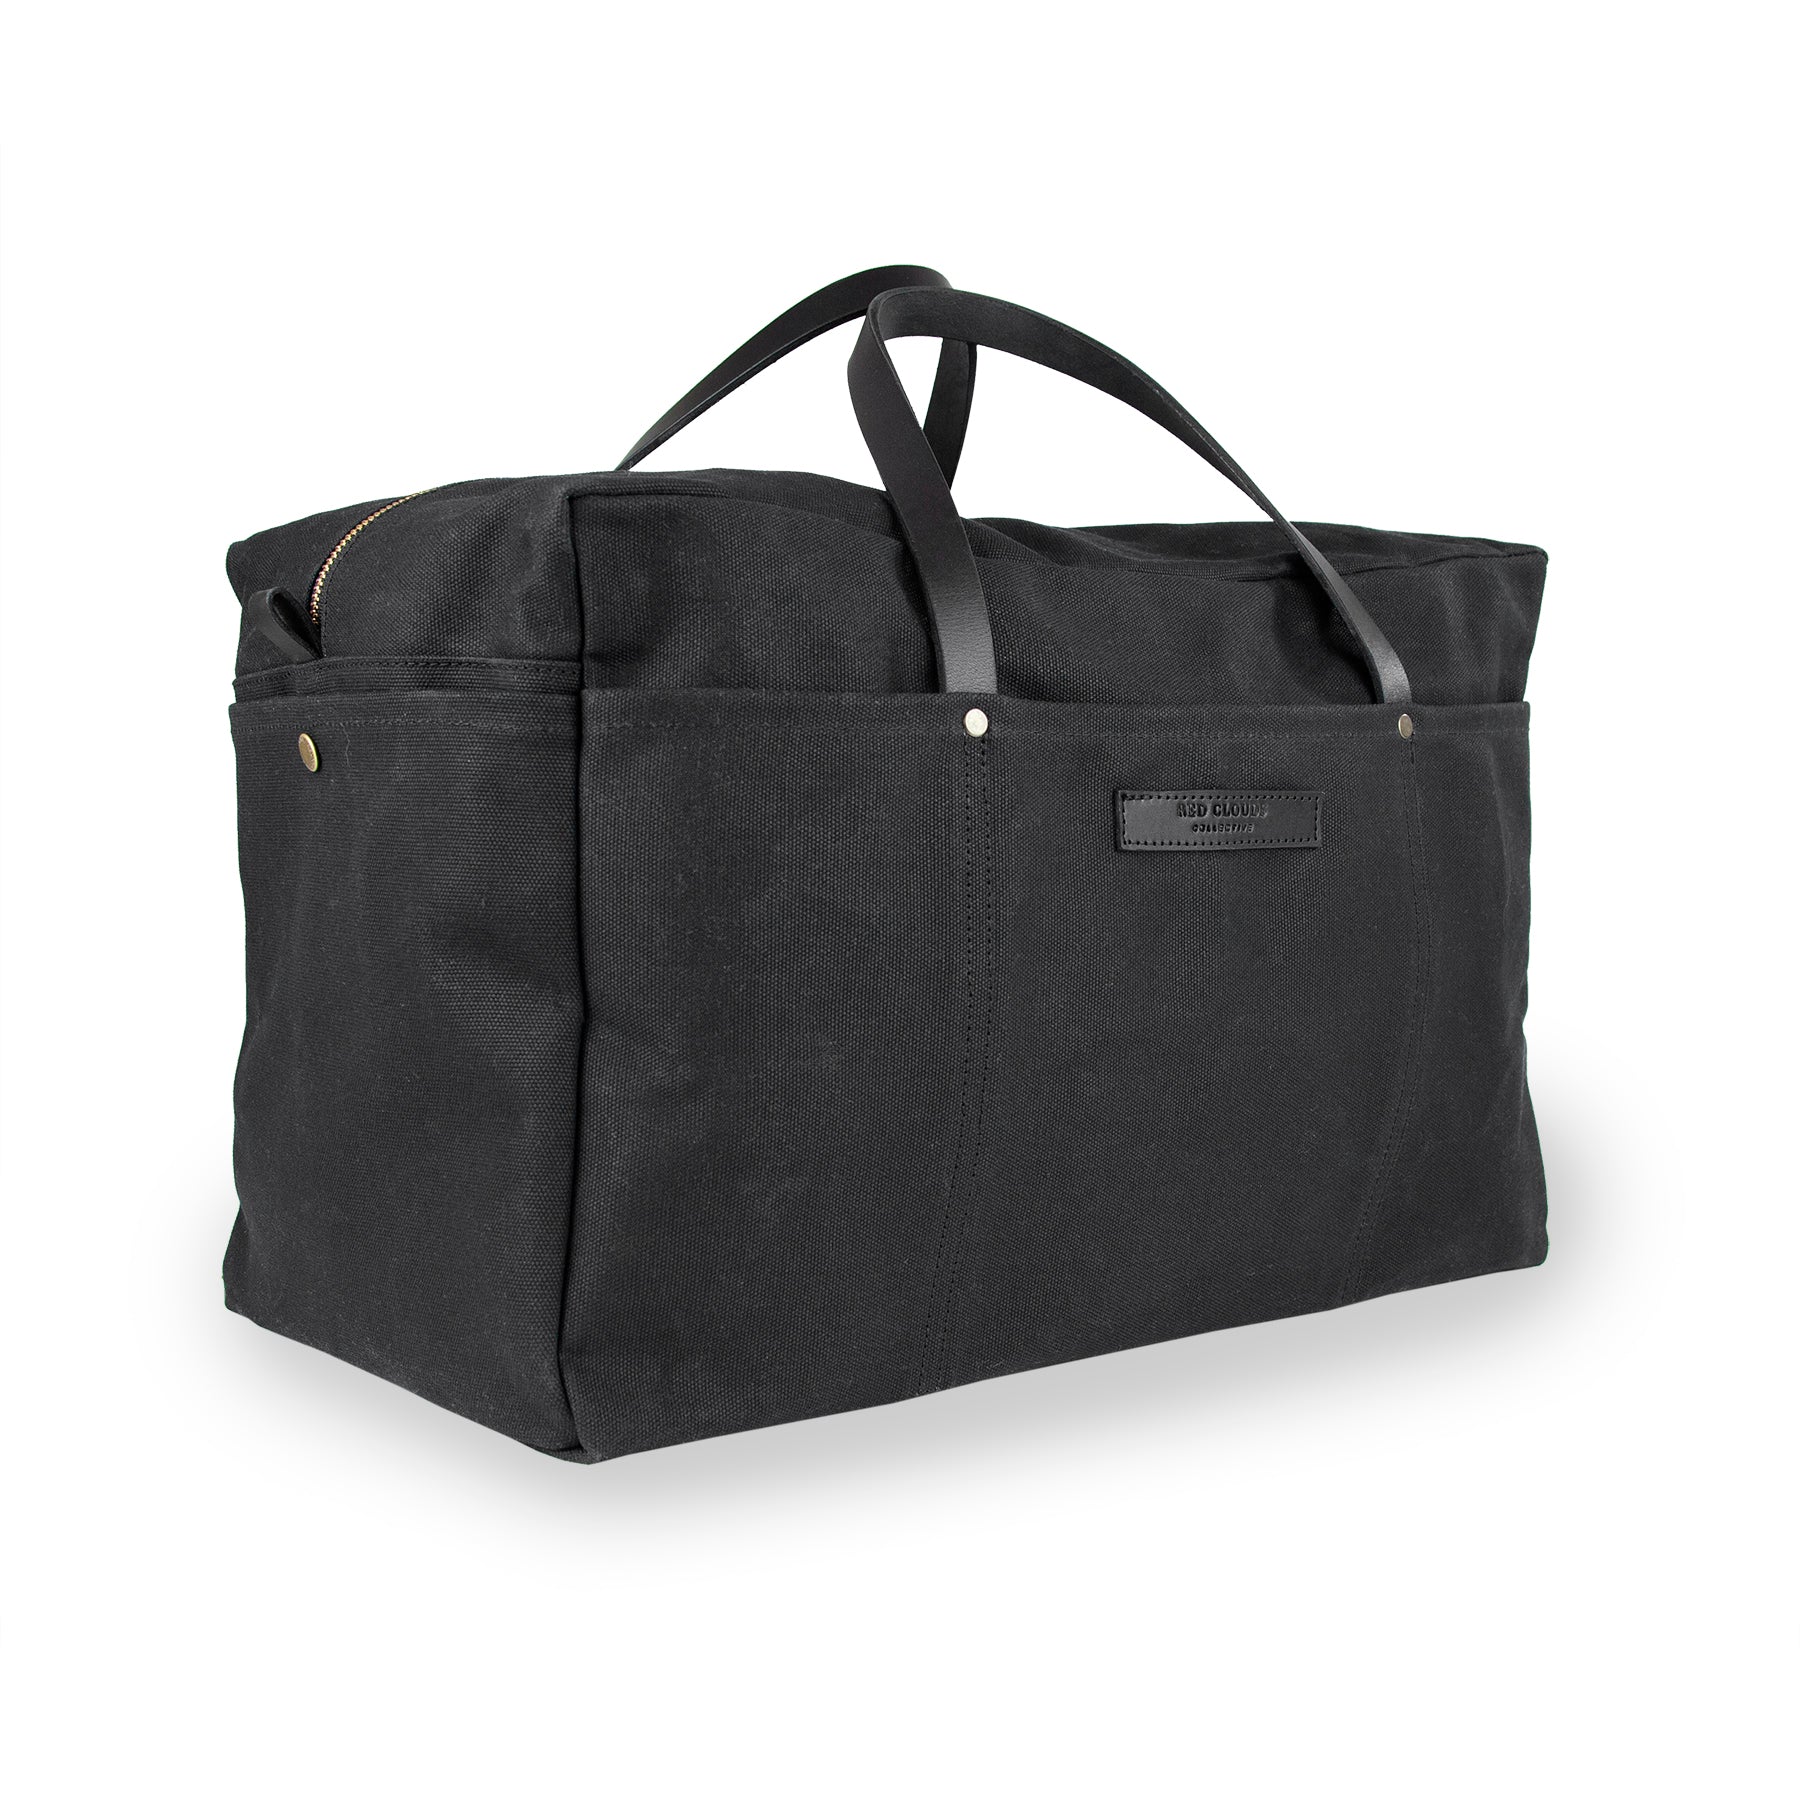 Weekender Bag in black canvas, Ethically Made